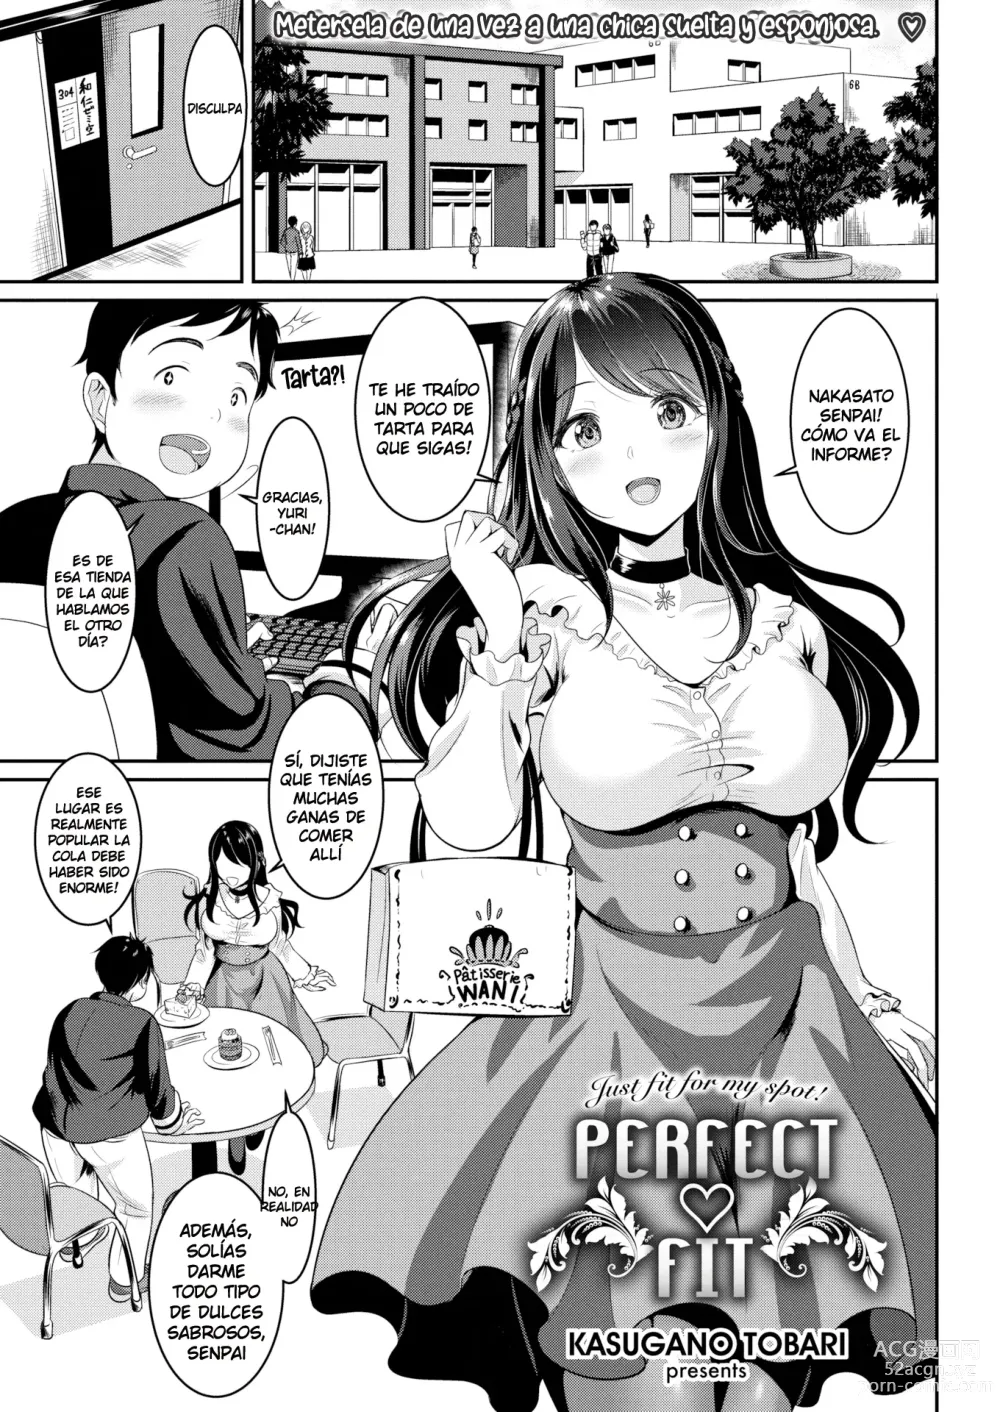 Page 1 of doujinshi Perfect ♥ Fit